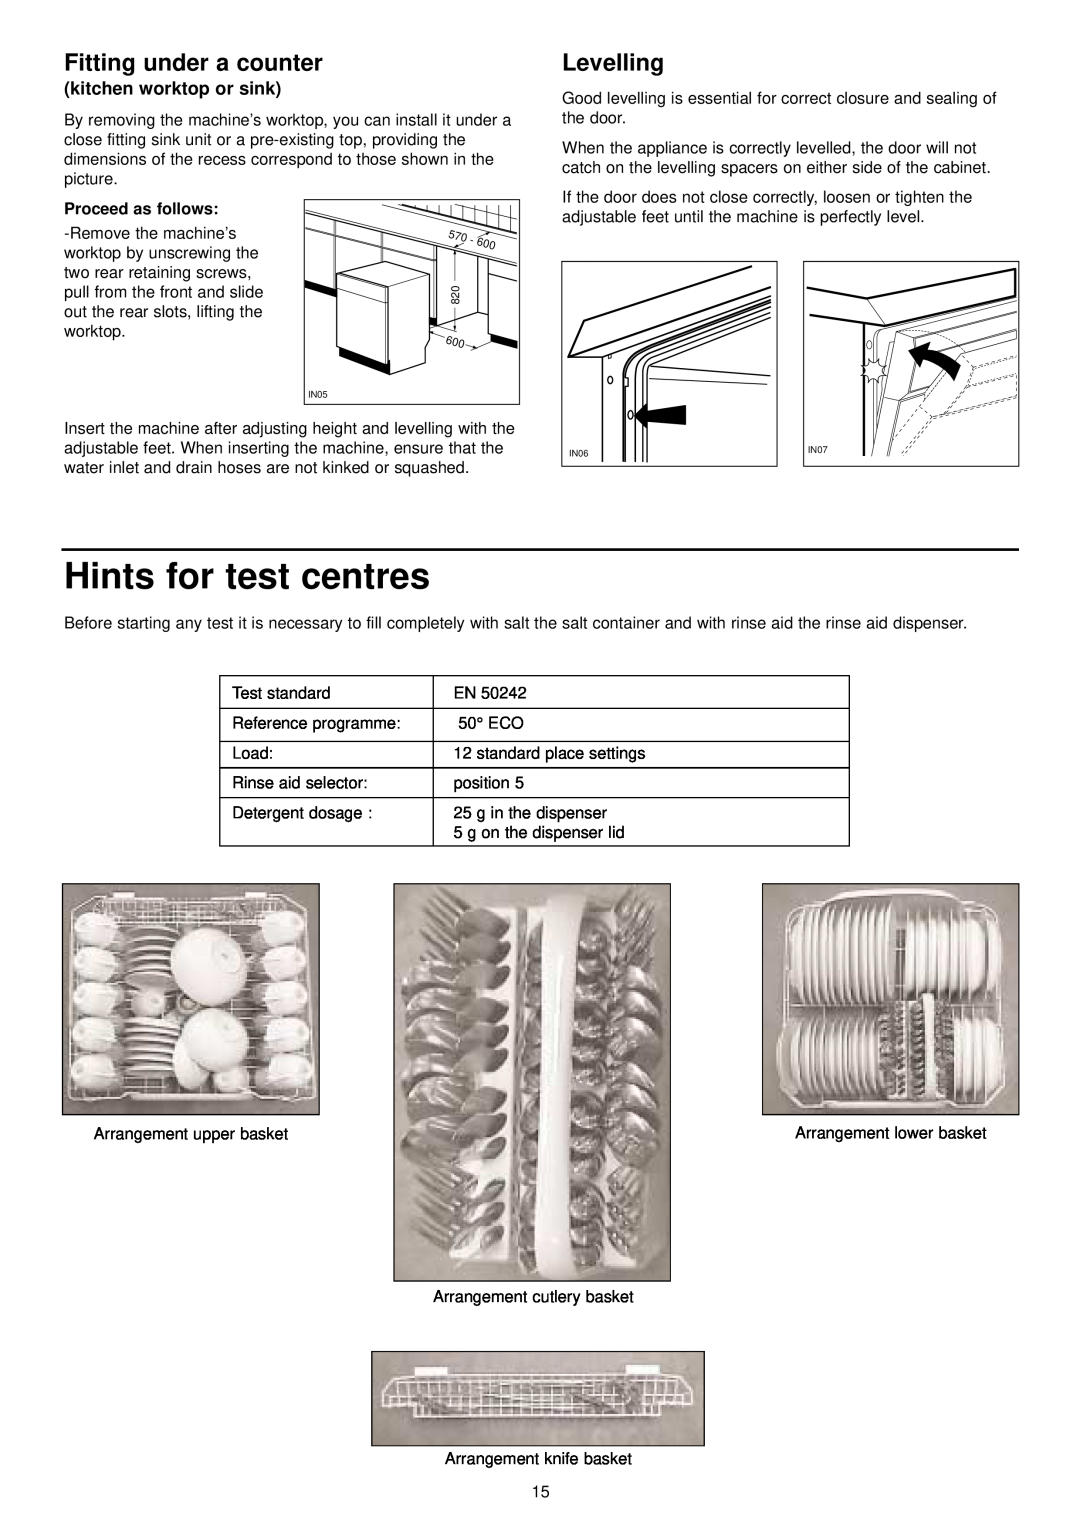 Zanussi IZZI manual Hints for test centres, Fitting under a counter, Levelling, kitchen worktop or sink, Proceed as follows 